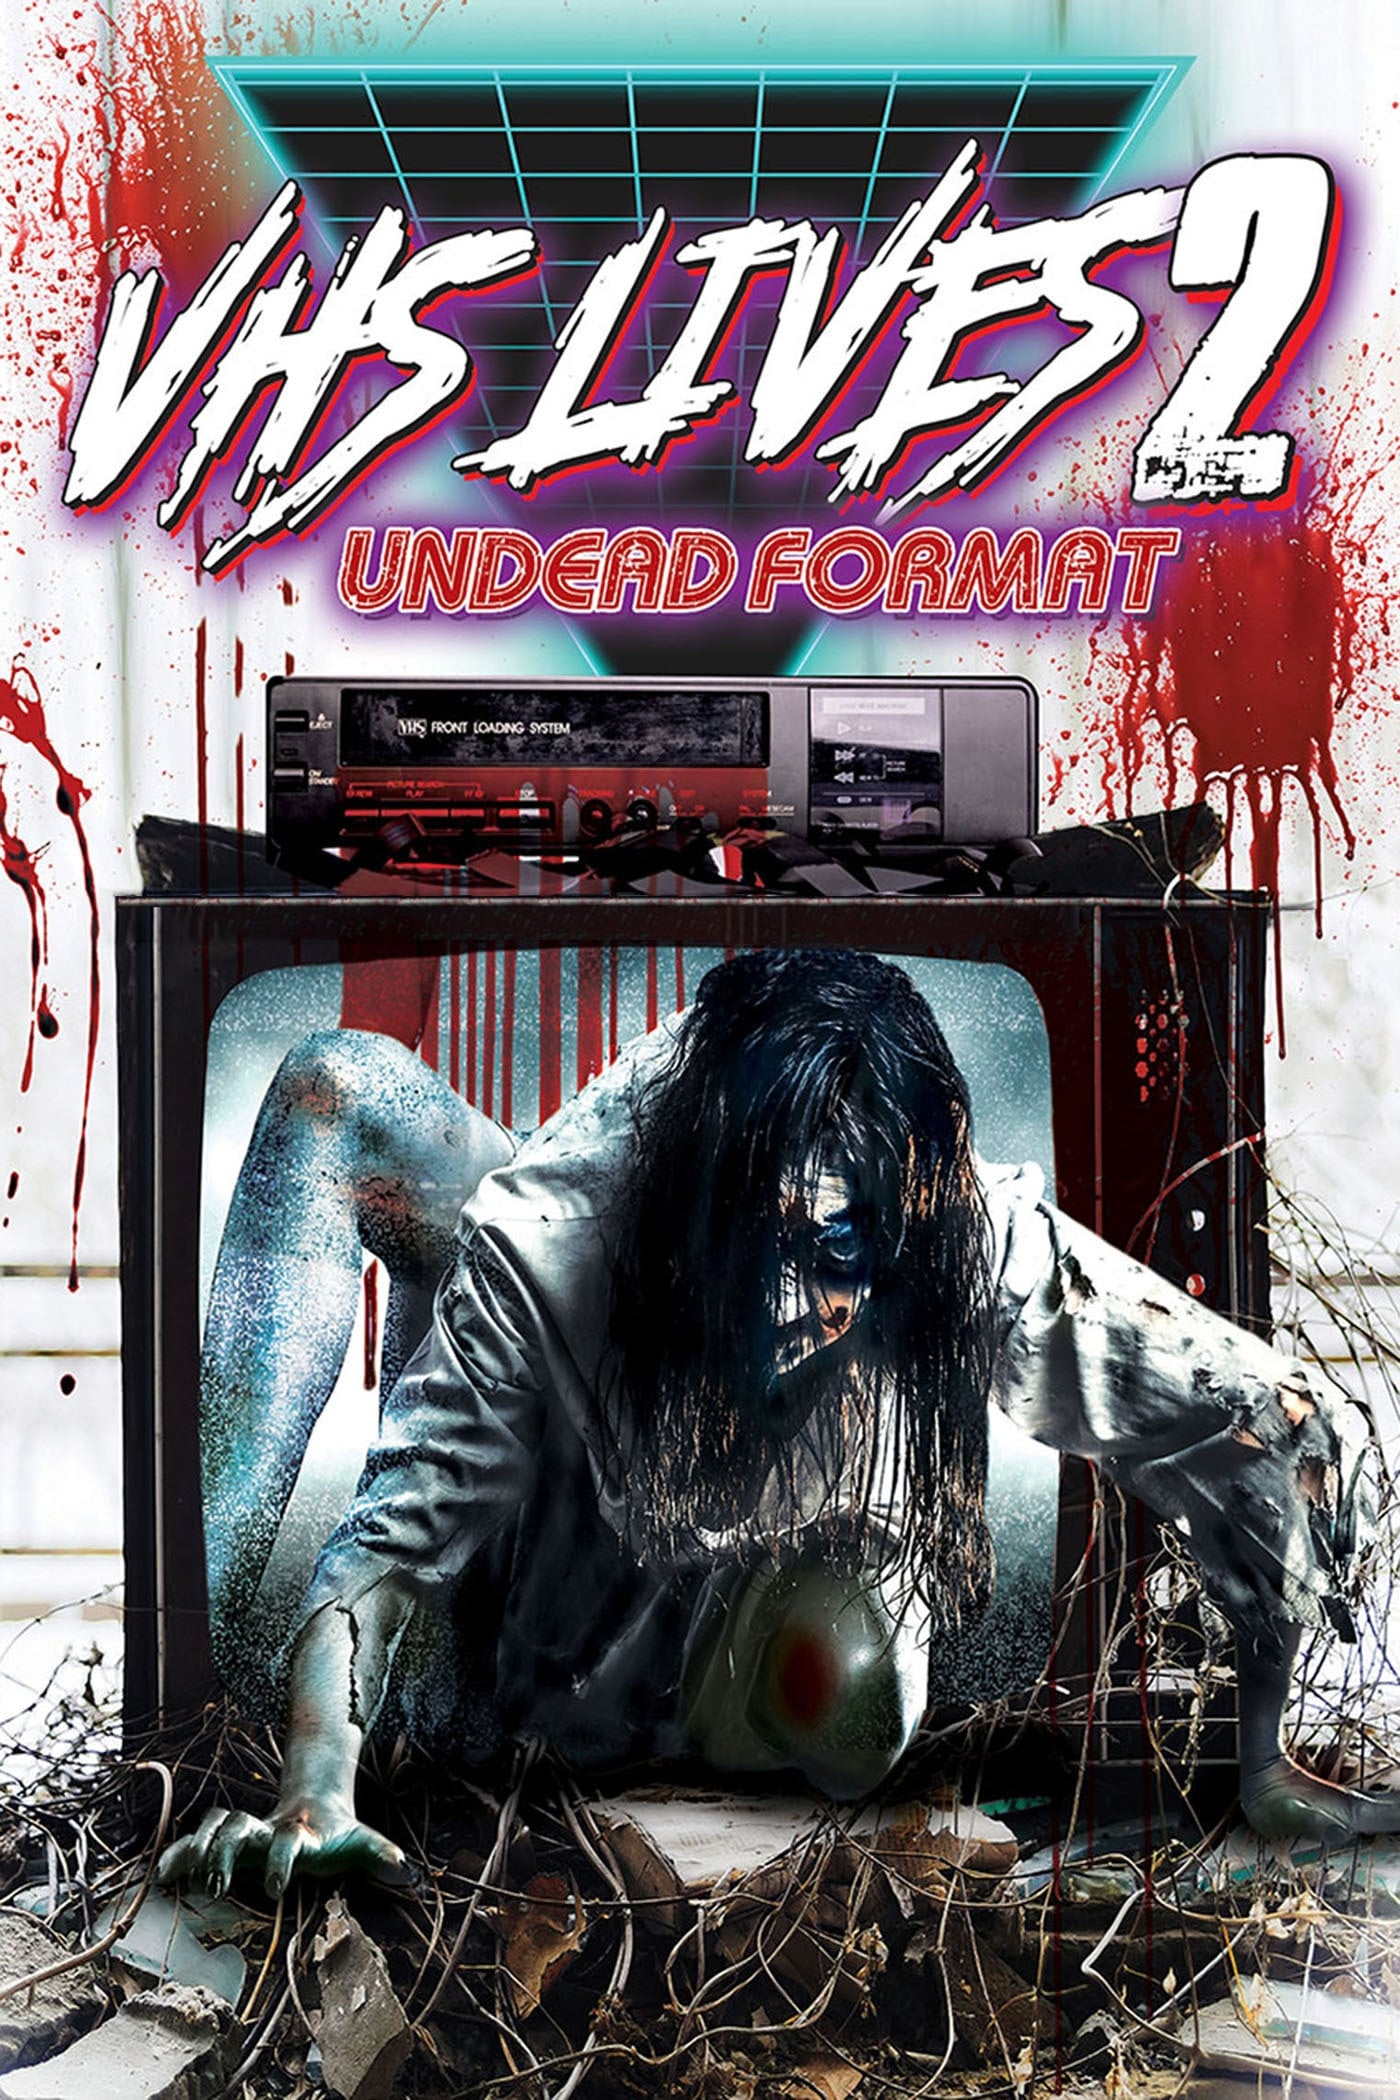 VHS Lives 2: Undead Format on FREECABLE TV